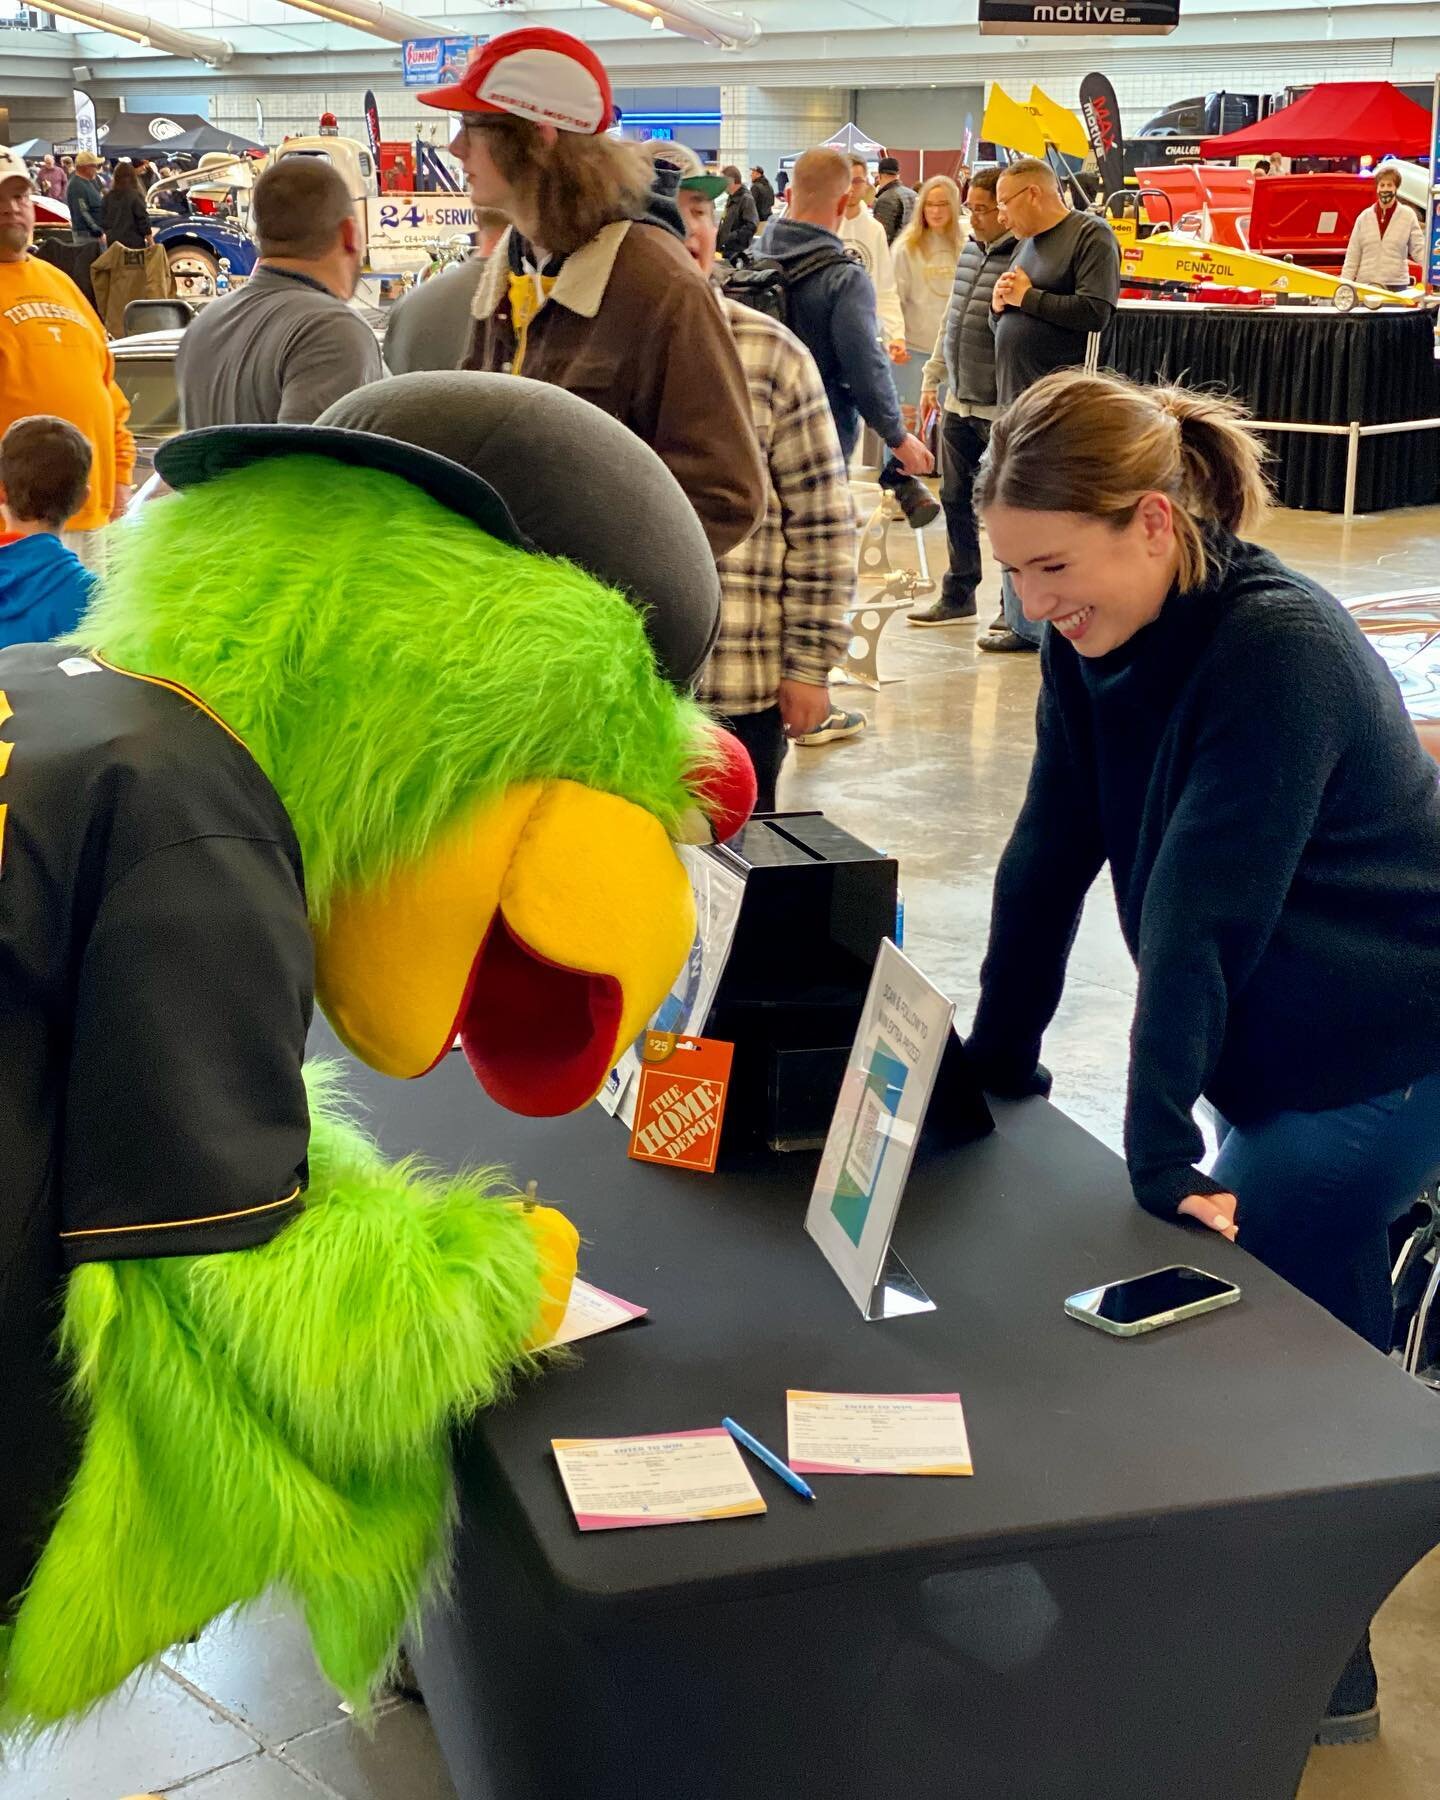 We don&rsquo;t have fun at work AT ALL. 😉 Local celeb siting at the Mint table- World of Wheels!! 🦜 @pittsburghpirates @pwbmw @hotrodshows 

www.mintpromos.com 

#pittsburgh #pittsburghpirates #pgh #412 #marketing #hotrod #carshow #promo #promotion